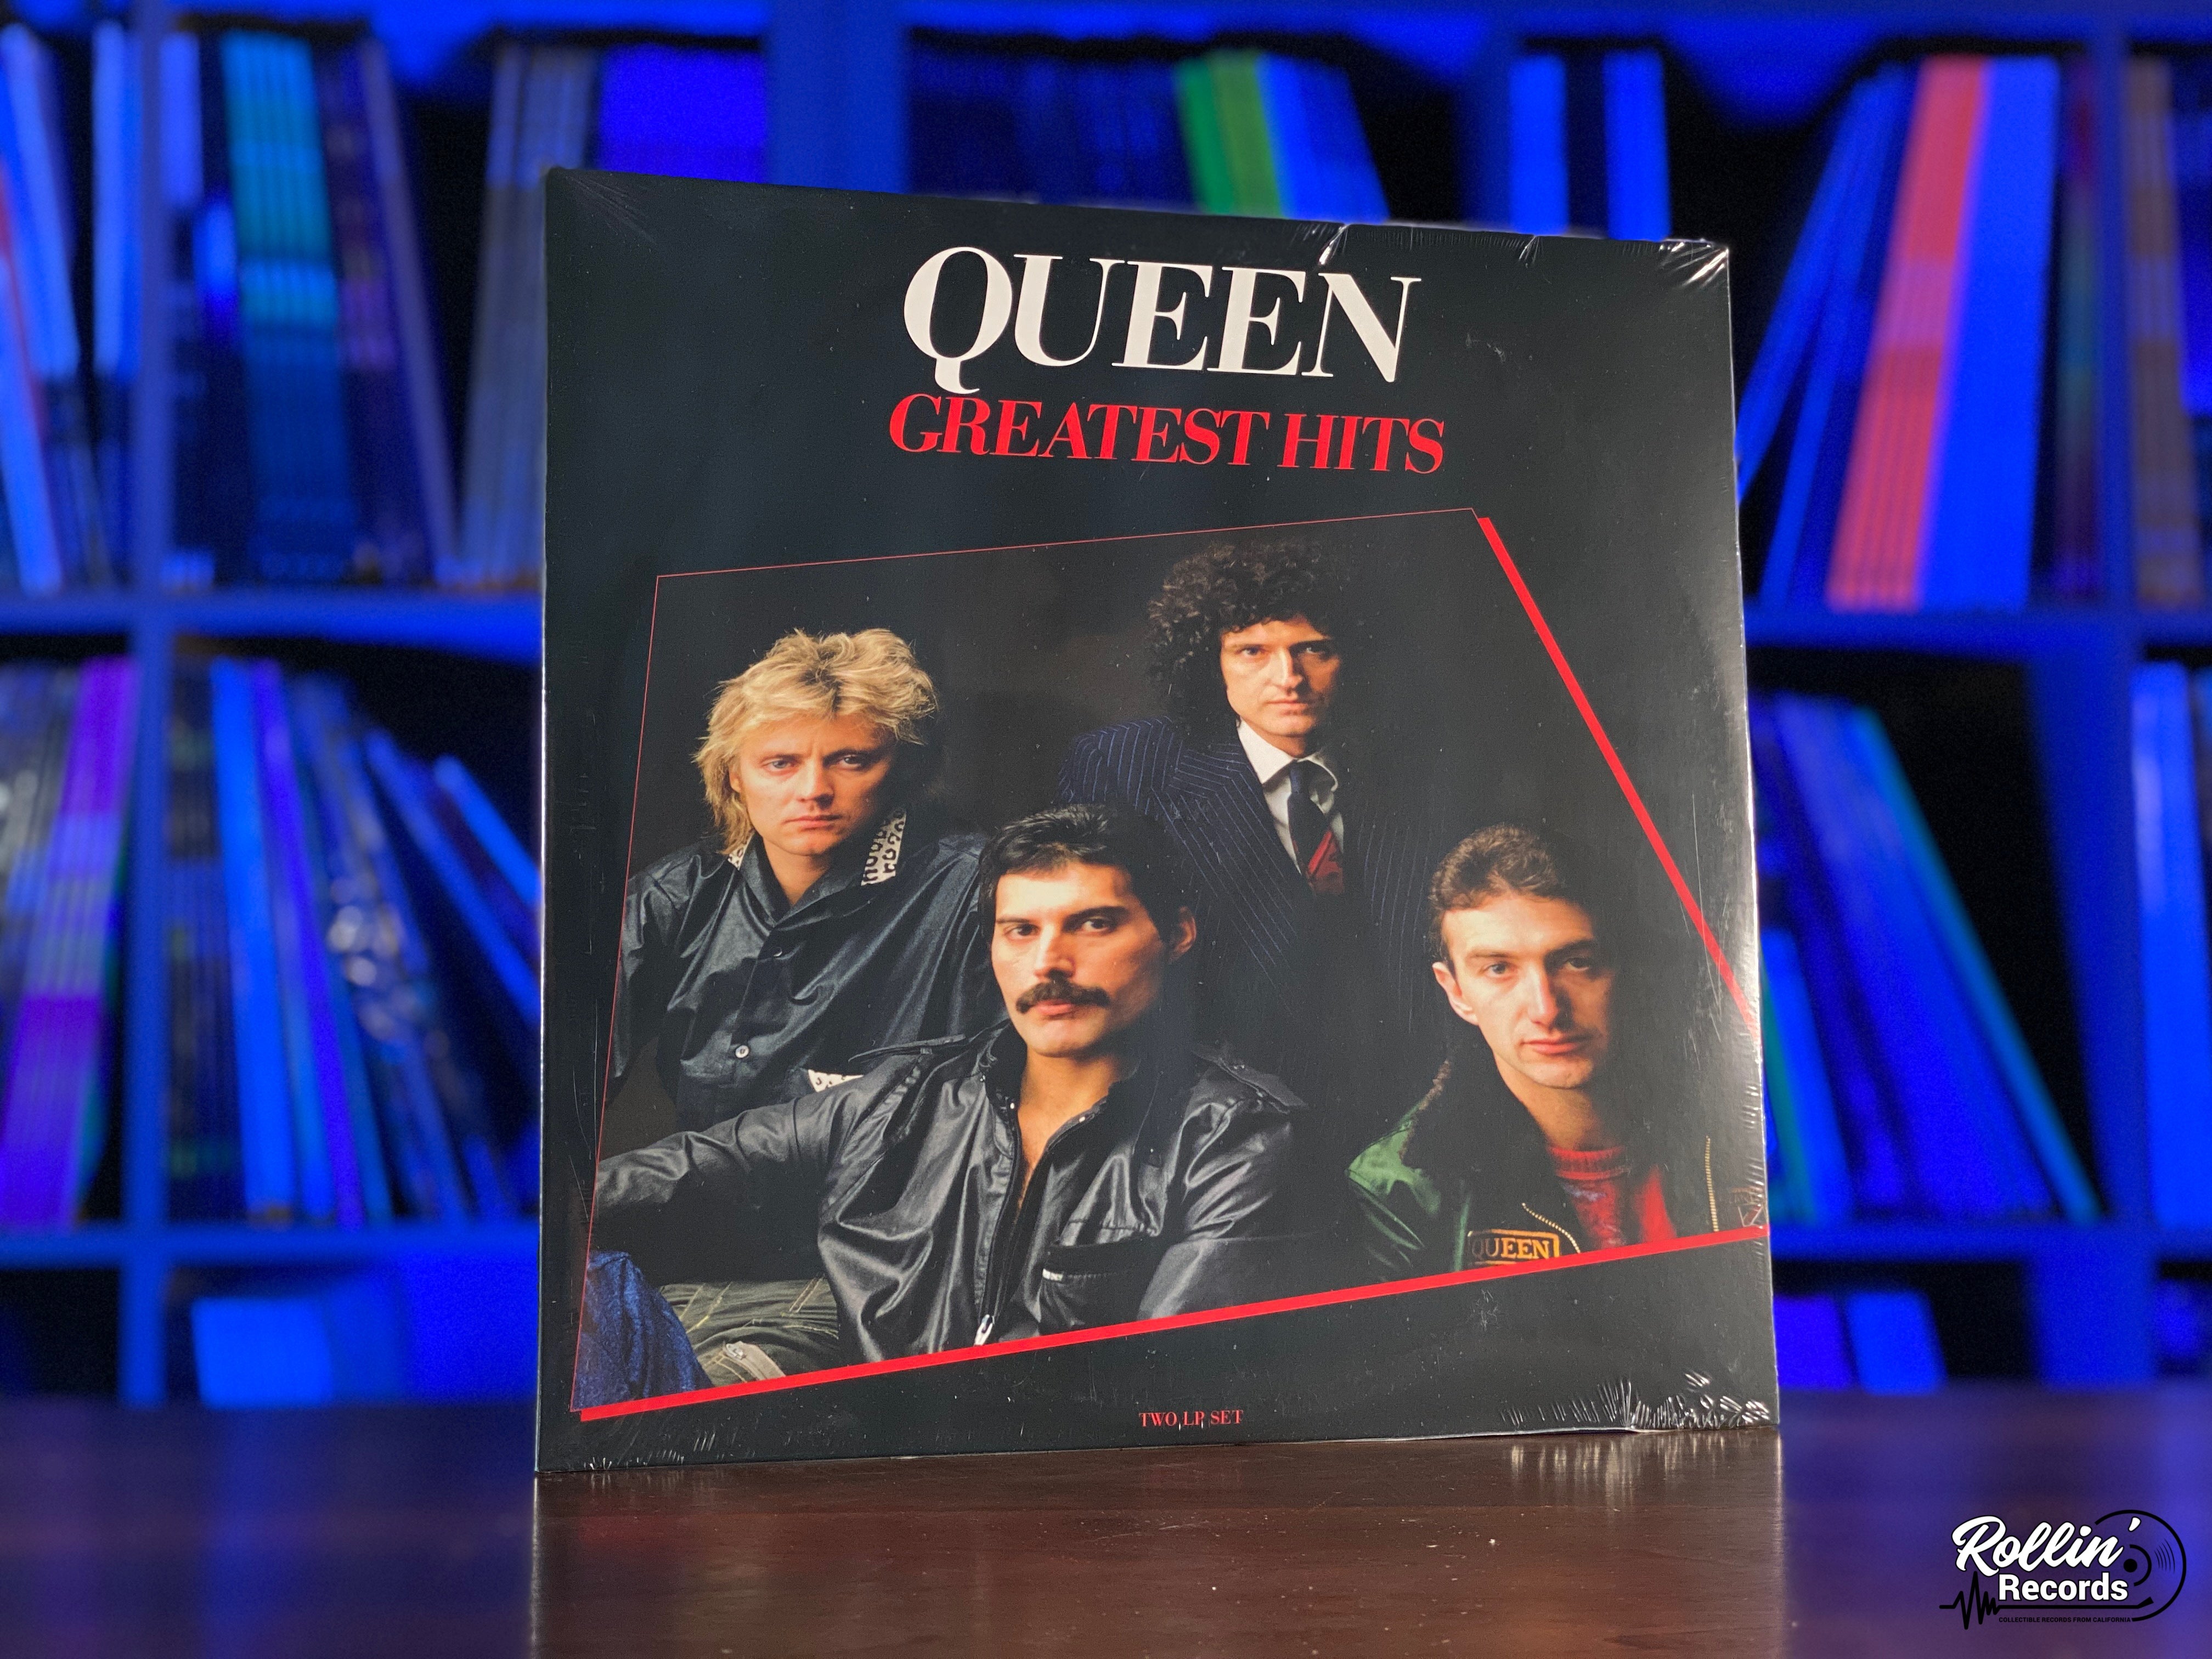 Queen - Greatest Hits – Rollin' Records